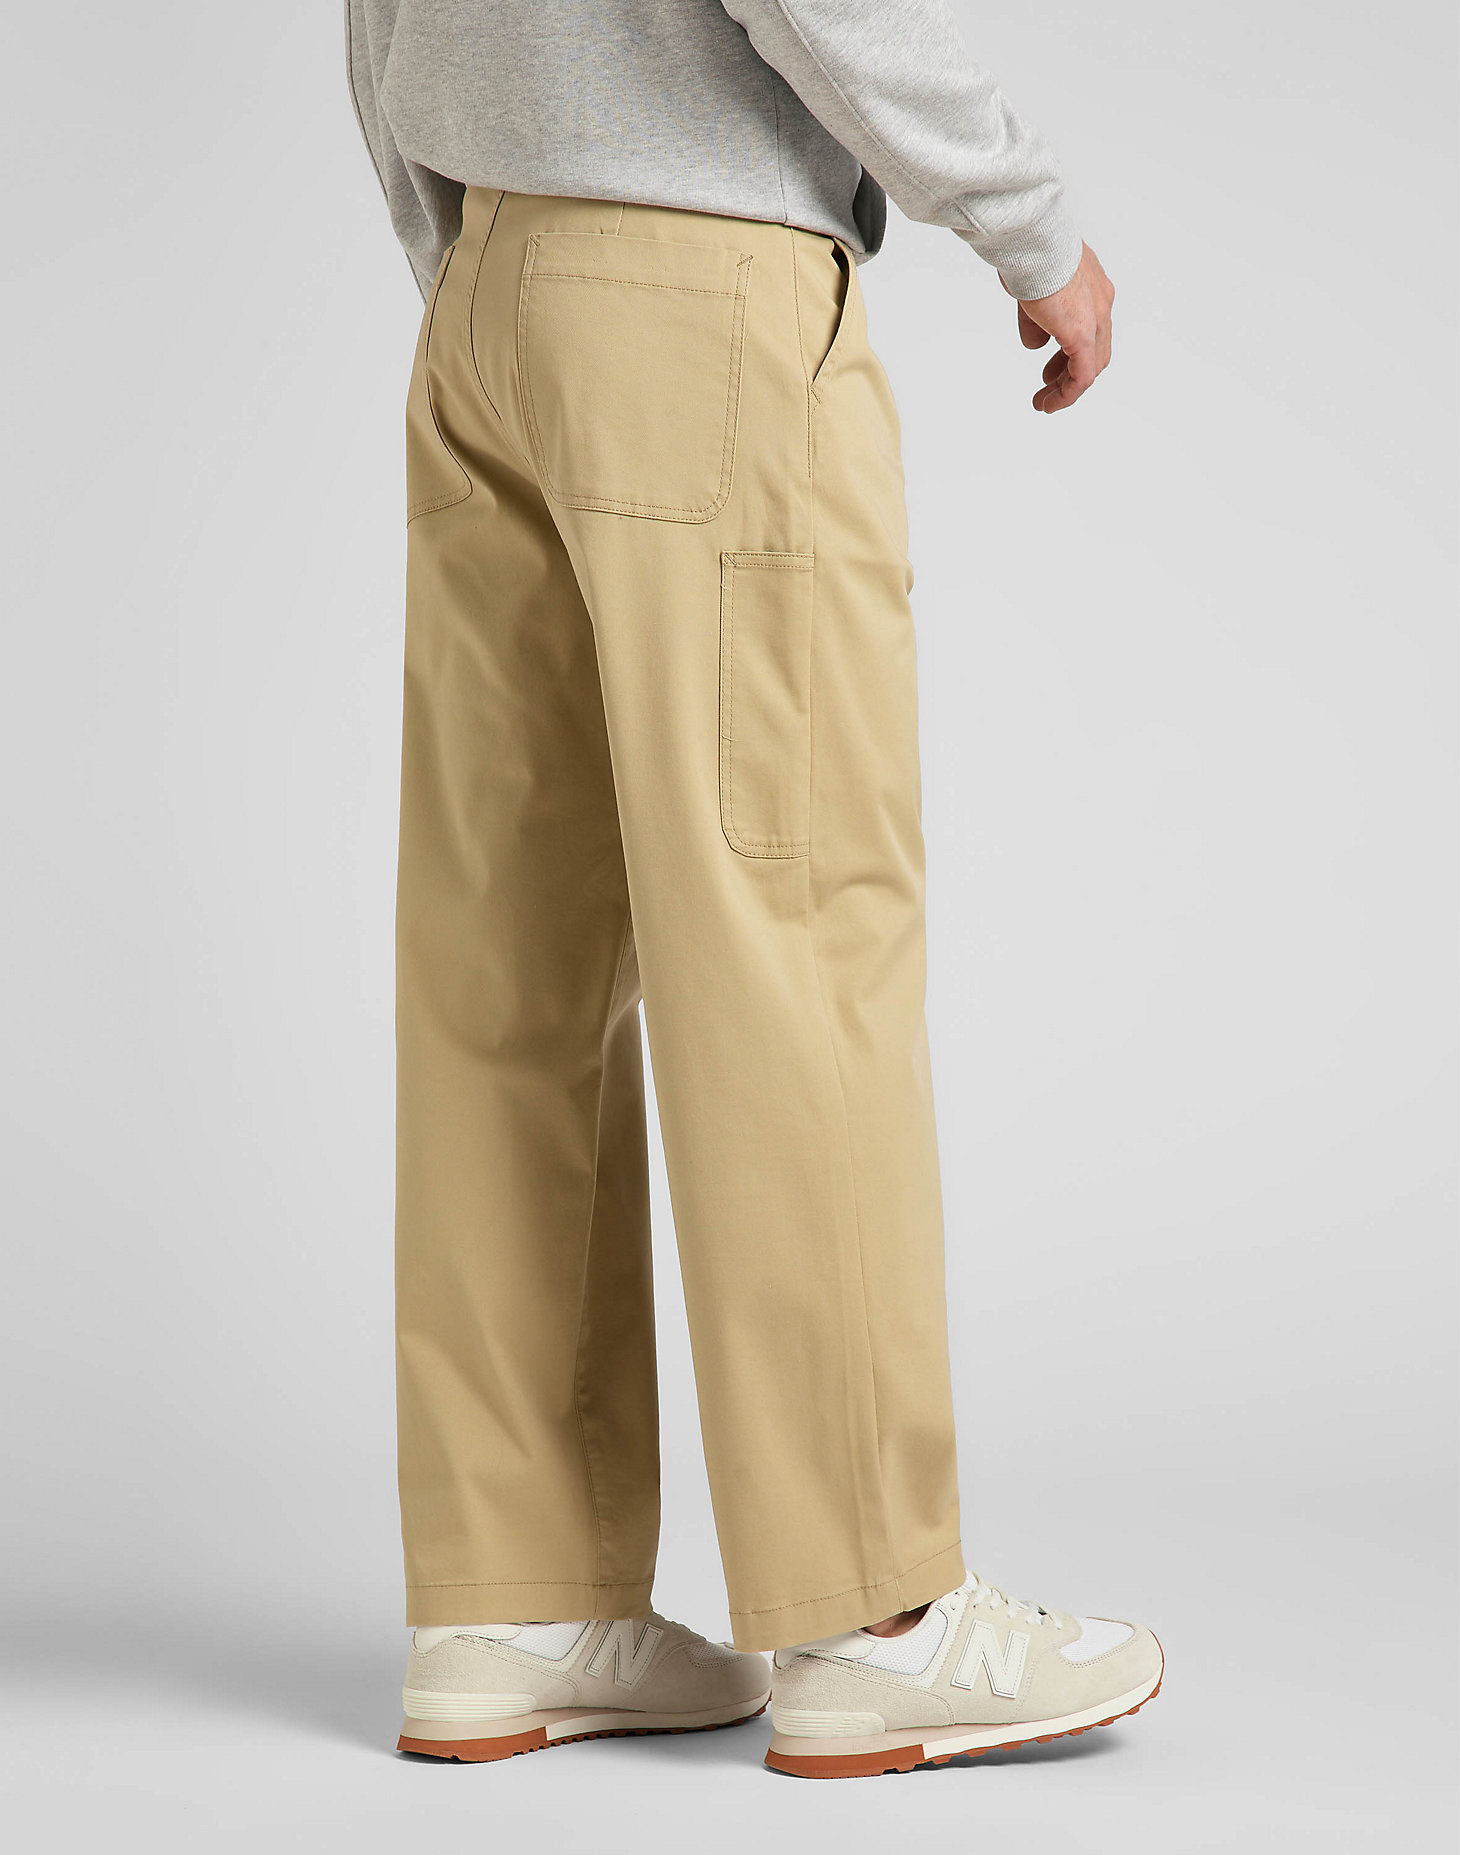 Loose Pleated Chino in Sand alternative view 3